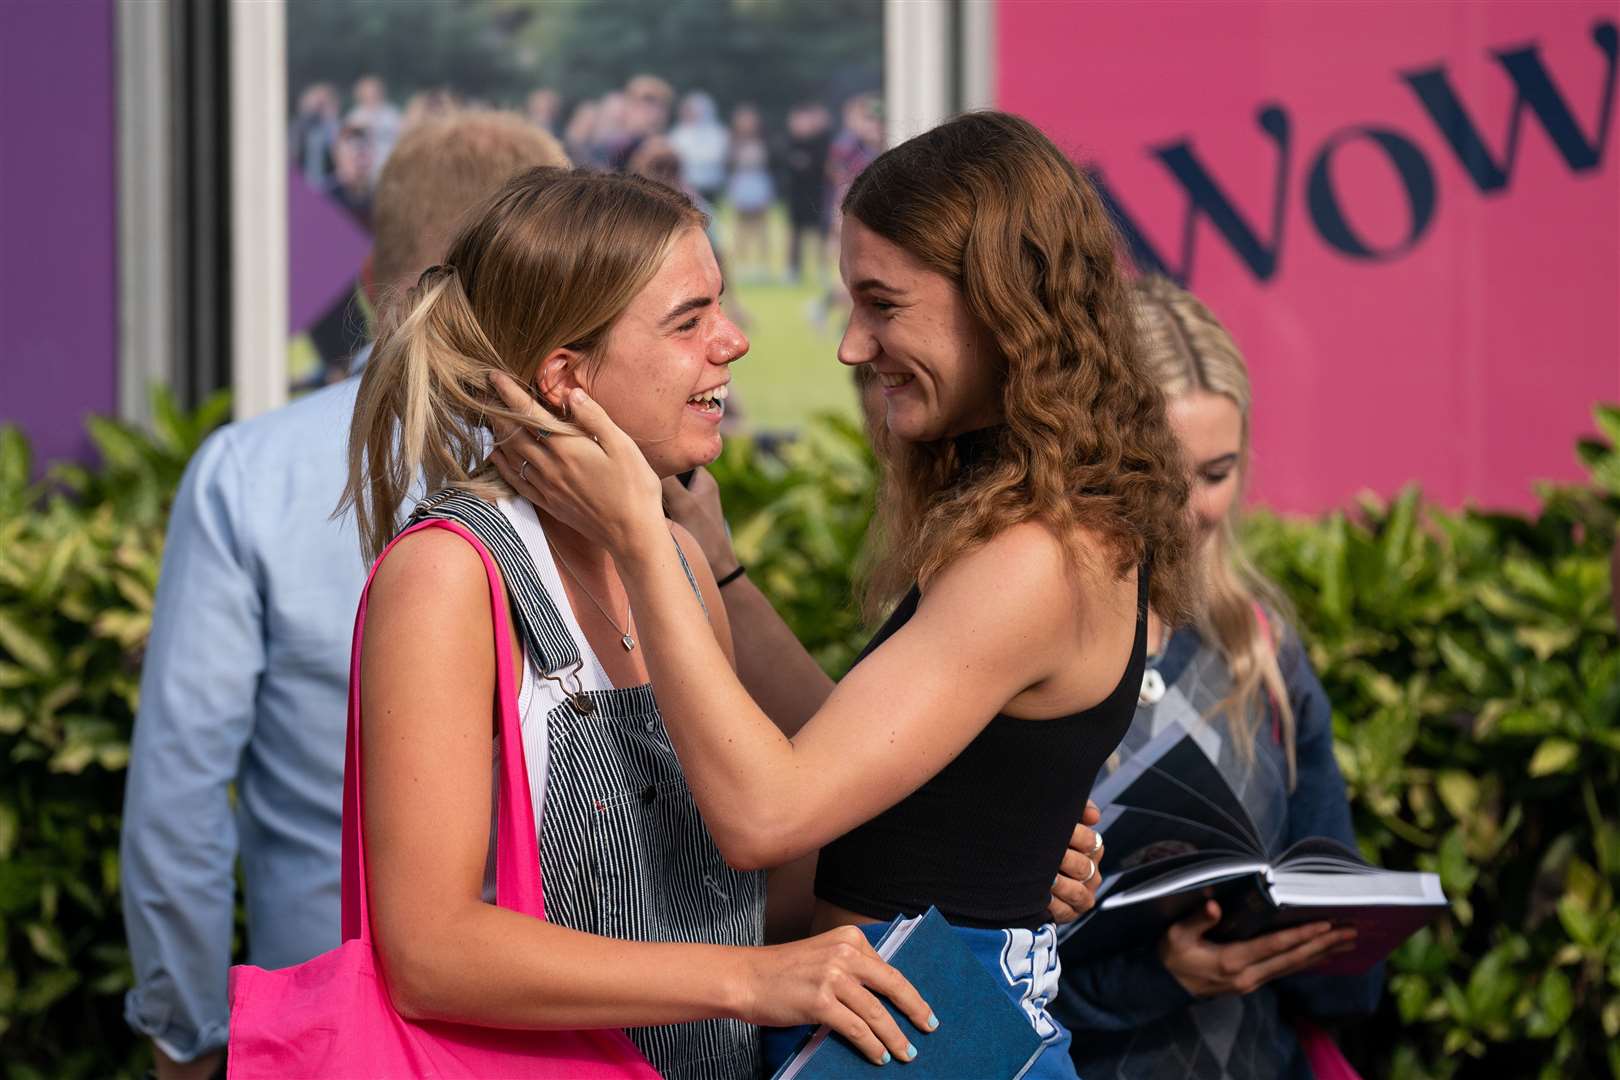 Alice Shaw, left, and Amelia Cropley celebrate with their A-level results at Norwich School (Joe Giddens/PA)